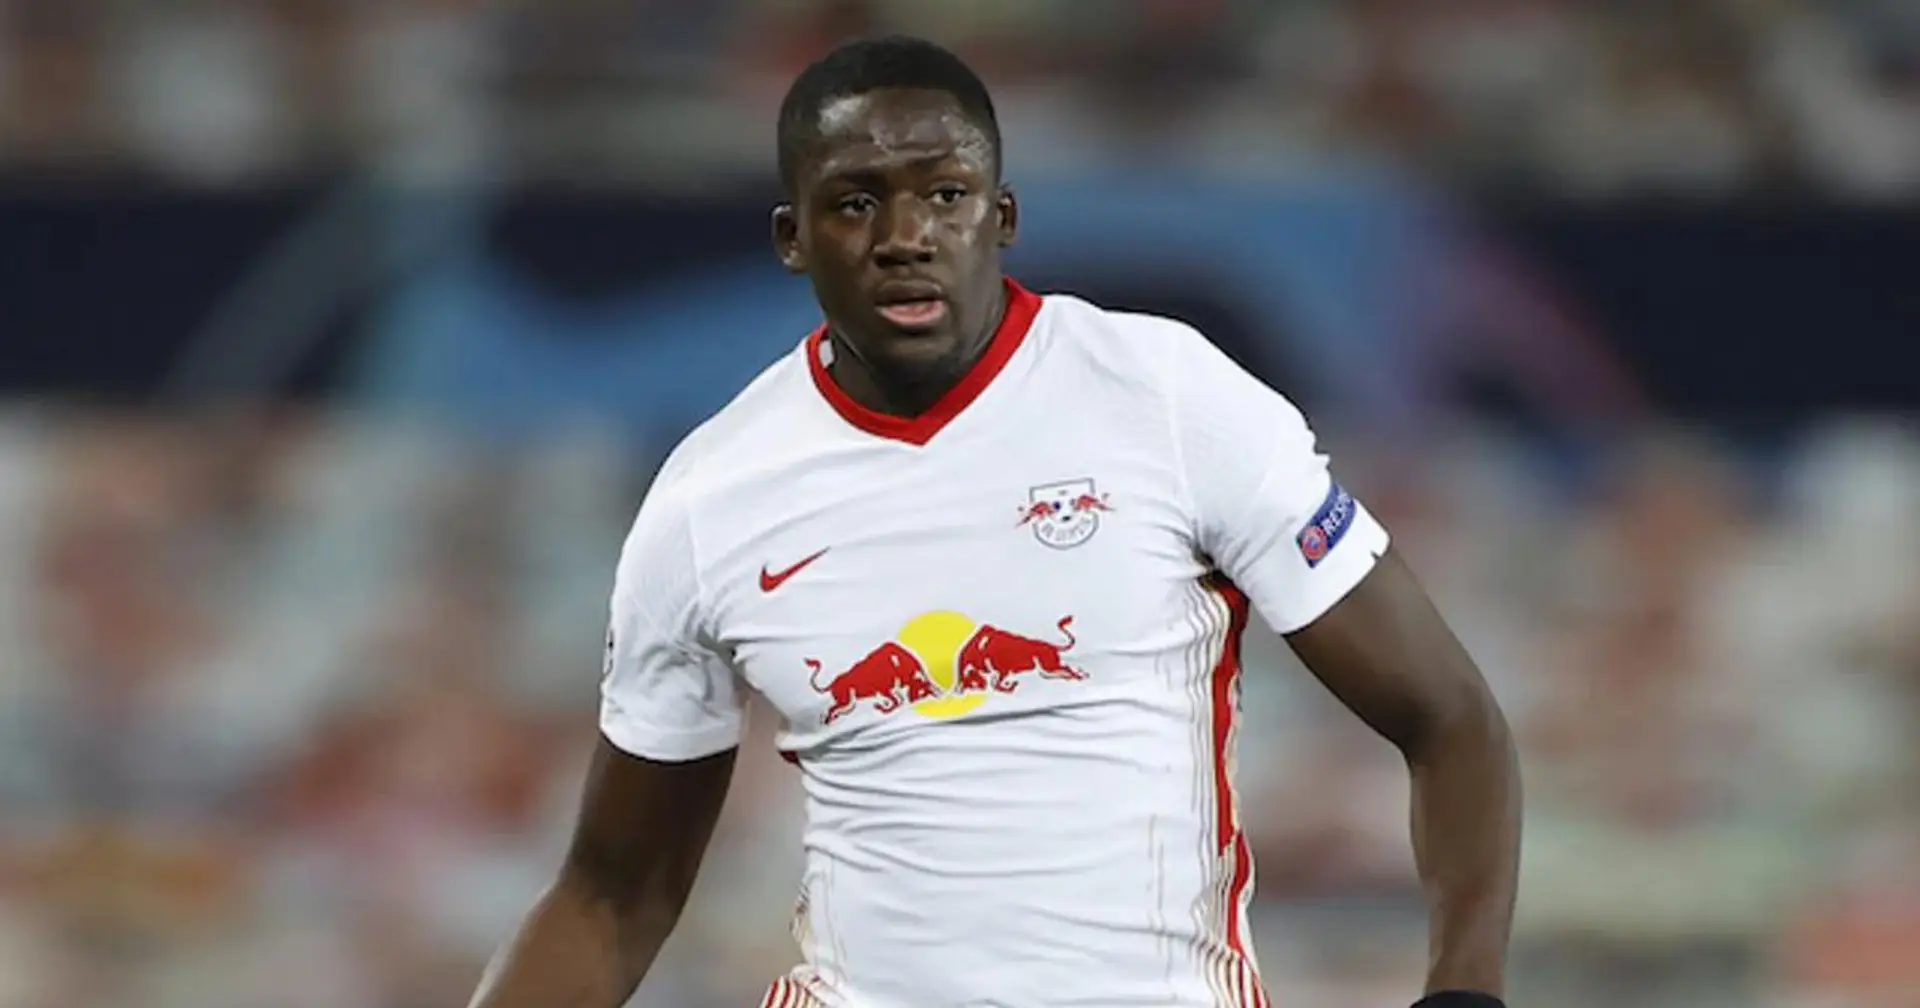 Great passer, tall, mirroring Van Dijk's game & more: Leipzig journalist on why centre-back Konate is perfect fit for Reds